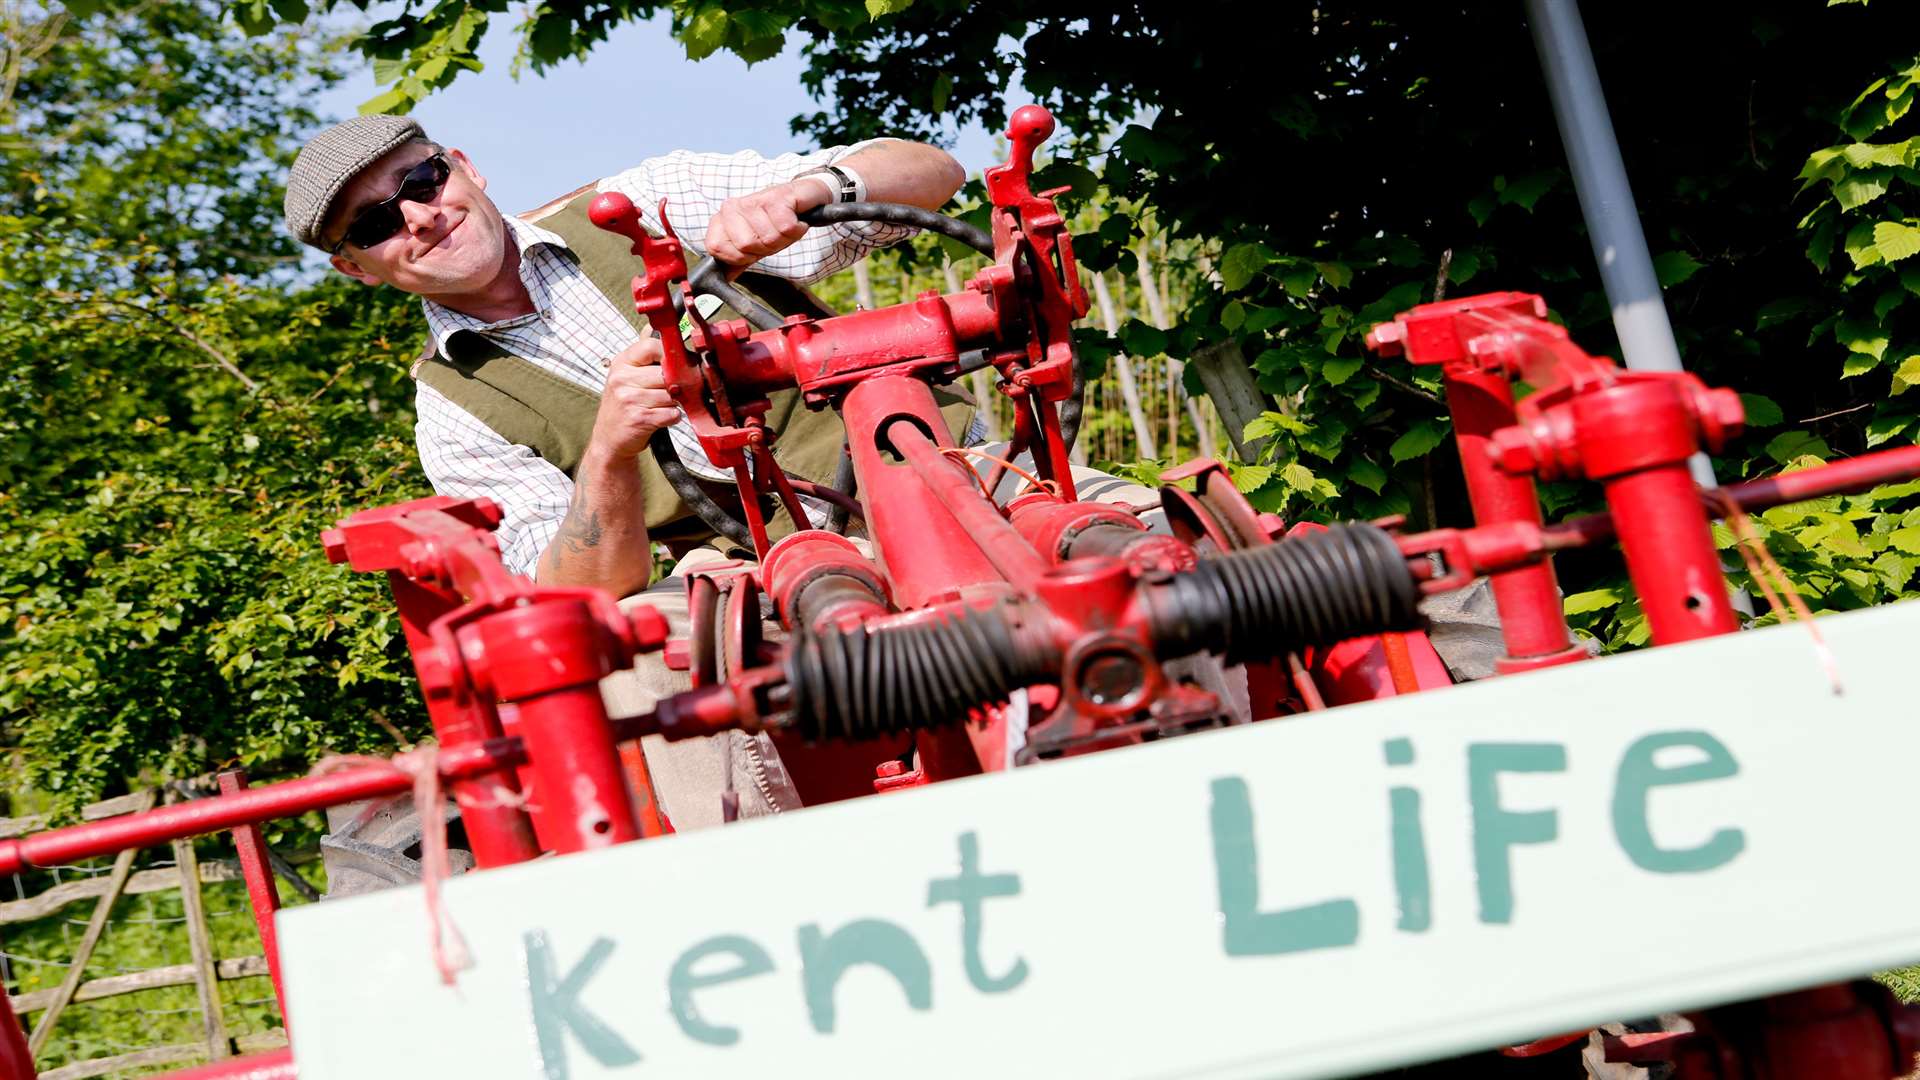 There are May Day celebrations at Kent Life near Maidstone